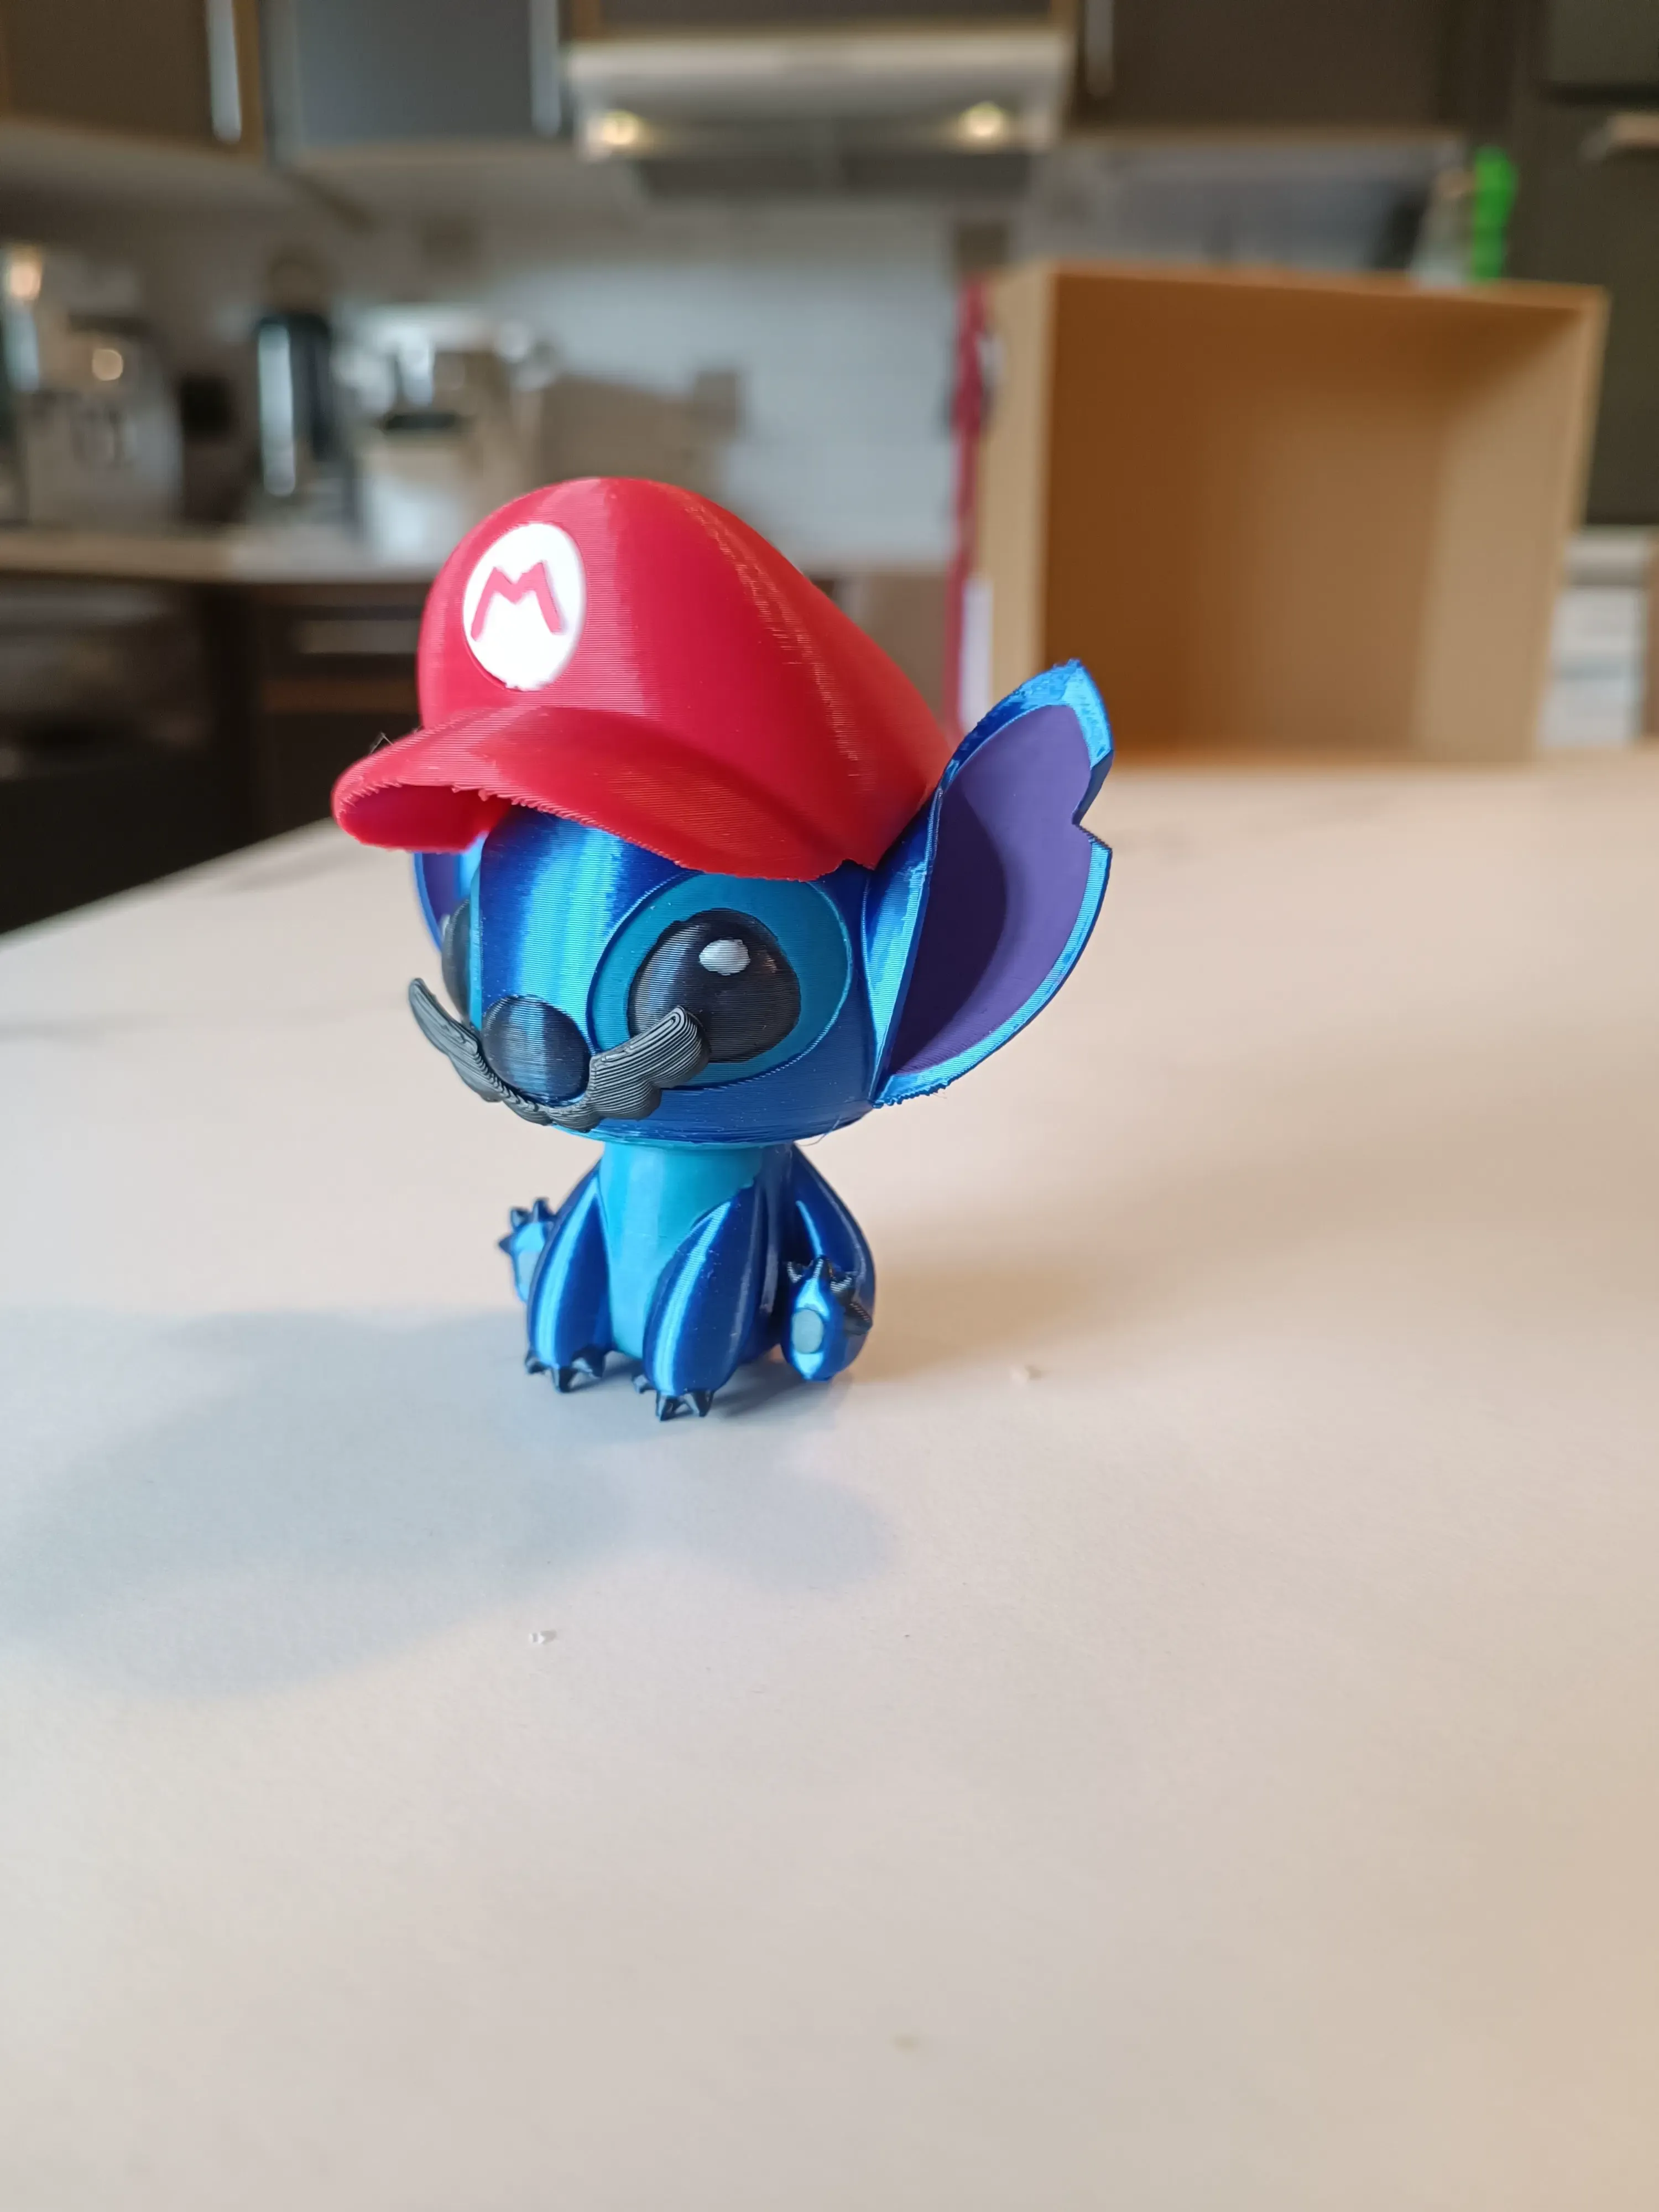 STITCH DISGUISED AS MARIO